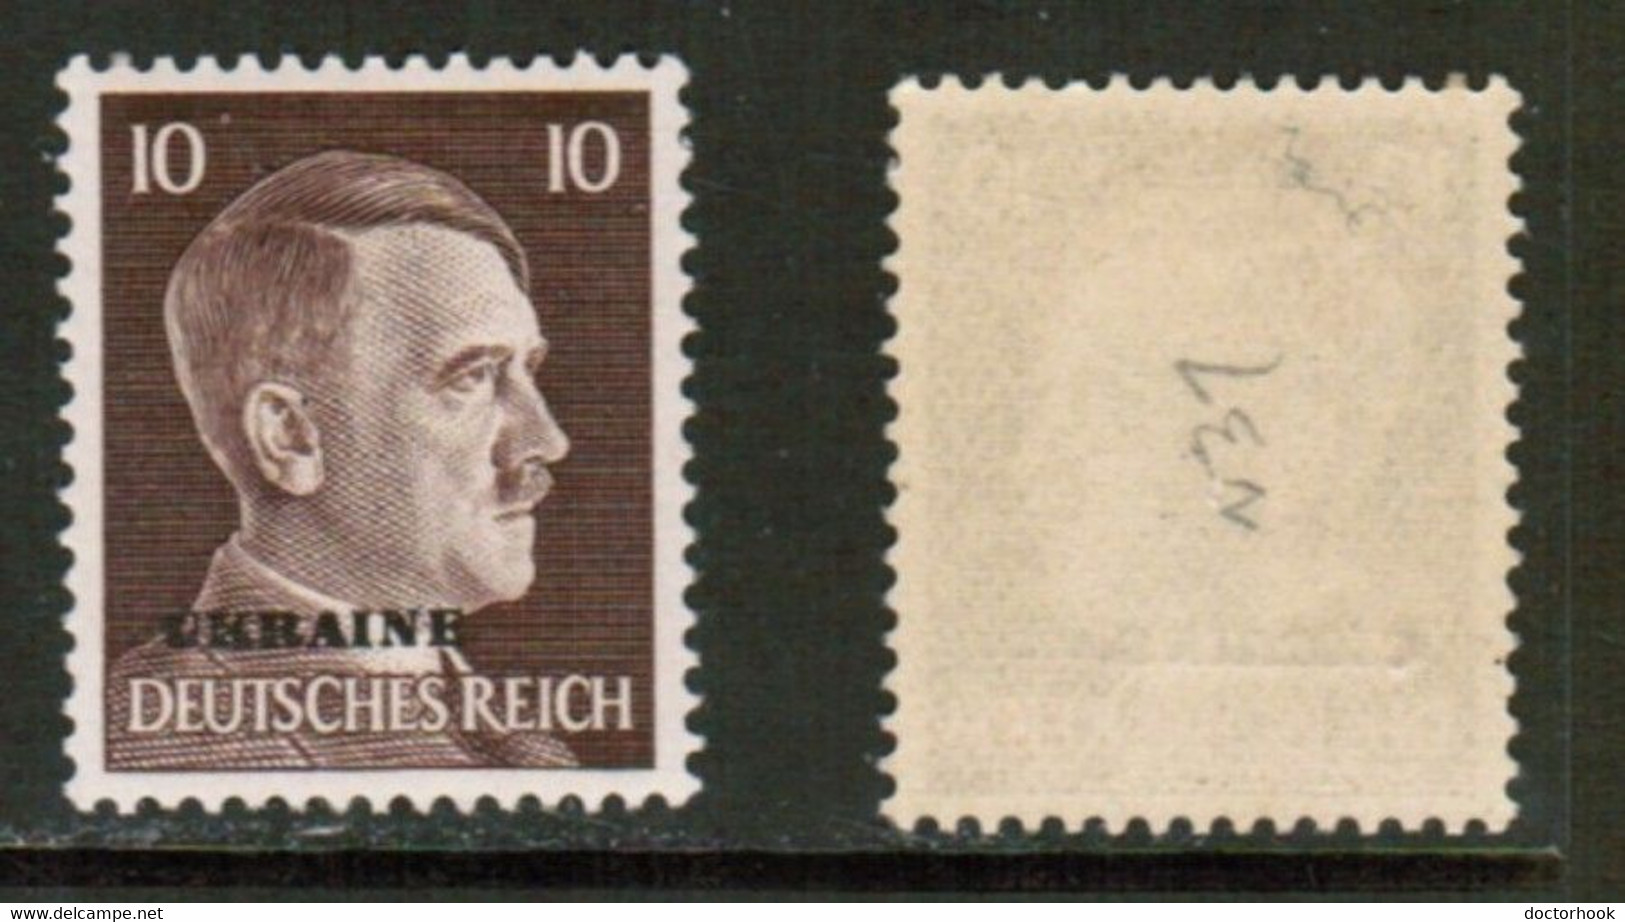 RUSSIA---German Occupation   Scott # N 37* MINT LH (CONDITION AS PER SCAN) (Stamp Scan # 847-12) - 1941-43 Ocupación Alemana